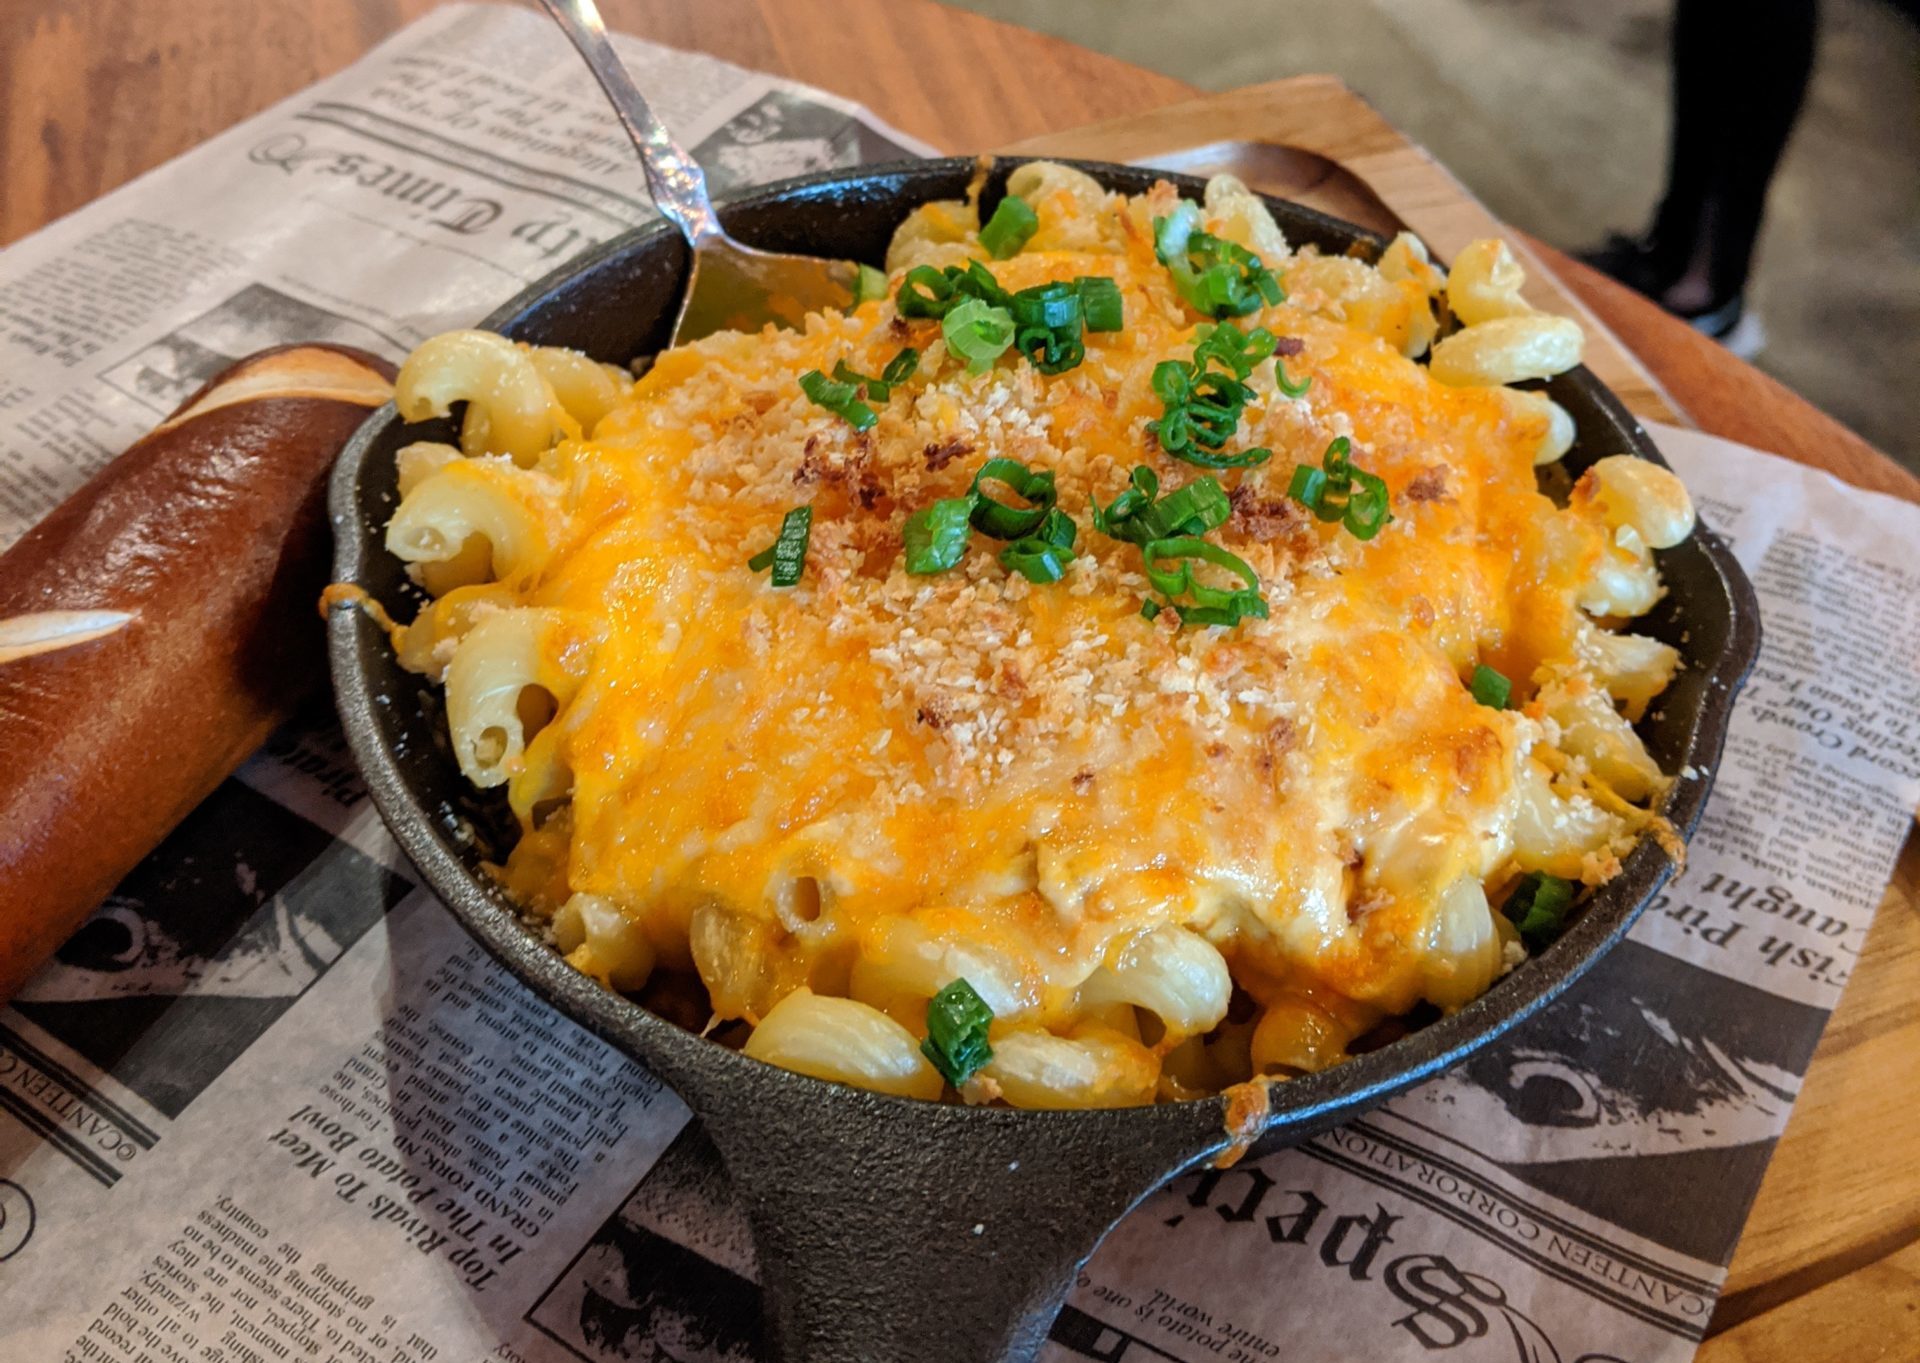 skillet mac and cheese from urban meyers pint house